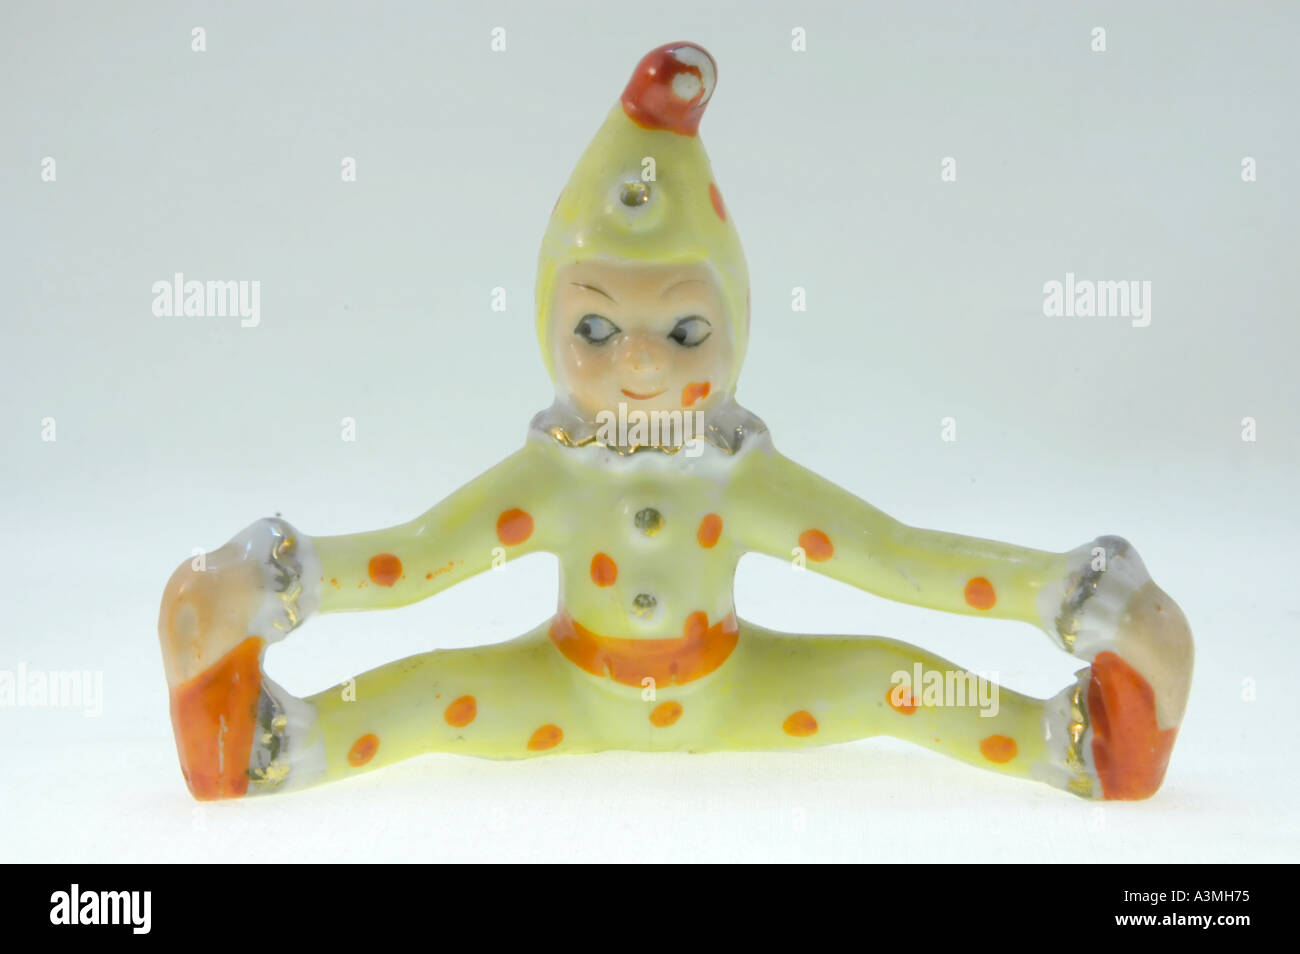 Antique ceramic pixie dressed as a clown sitting down or jumping and touching his feet Stock Photo